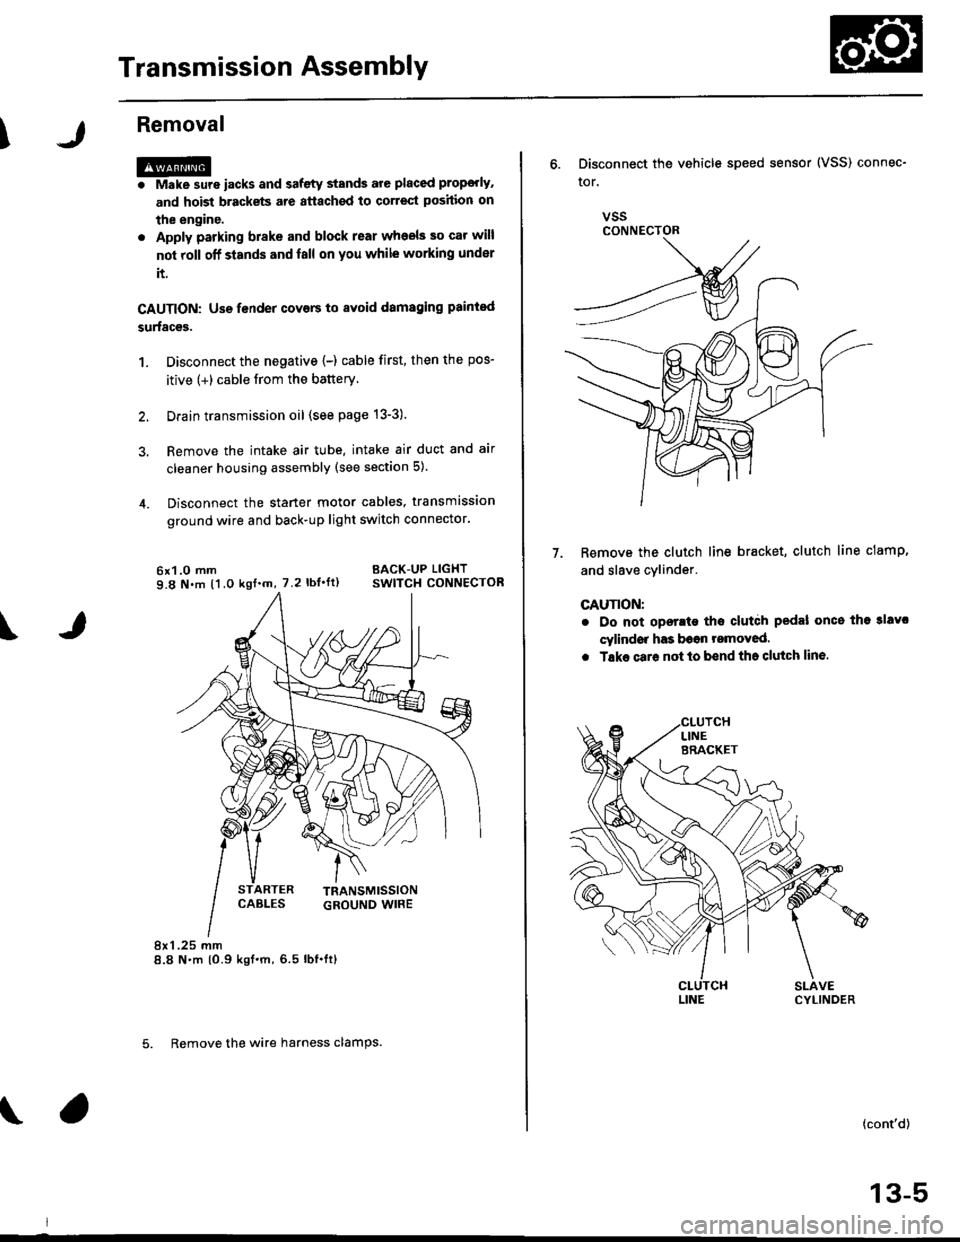 HONDA CIVIC 1999 6.G User Guide Transmission Assembly
I
Removal
@. Make sure iacks and safety stands are placed prop€dy,
and hoist brackets are atlach€d to correct position on
the enginc.
. Apply parking brake and block rear who